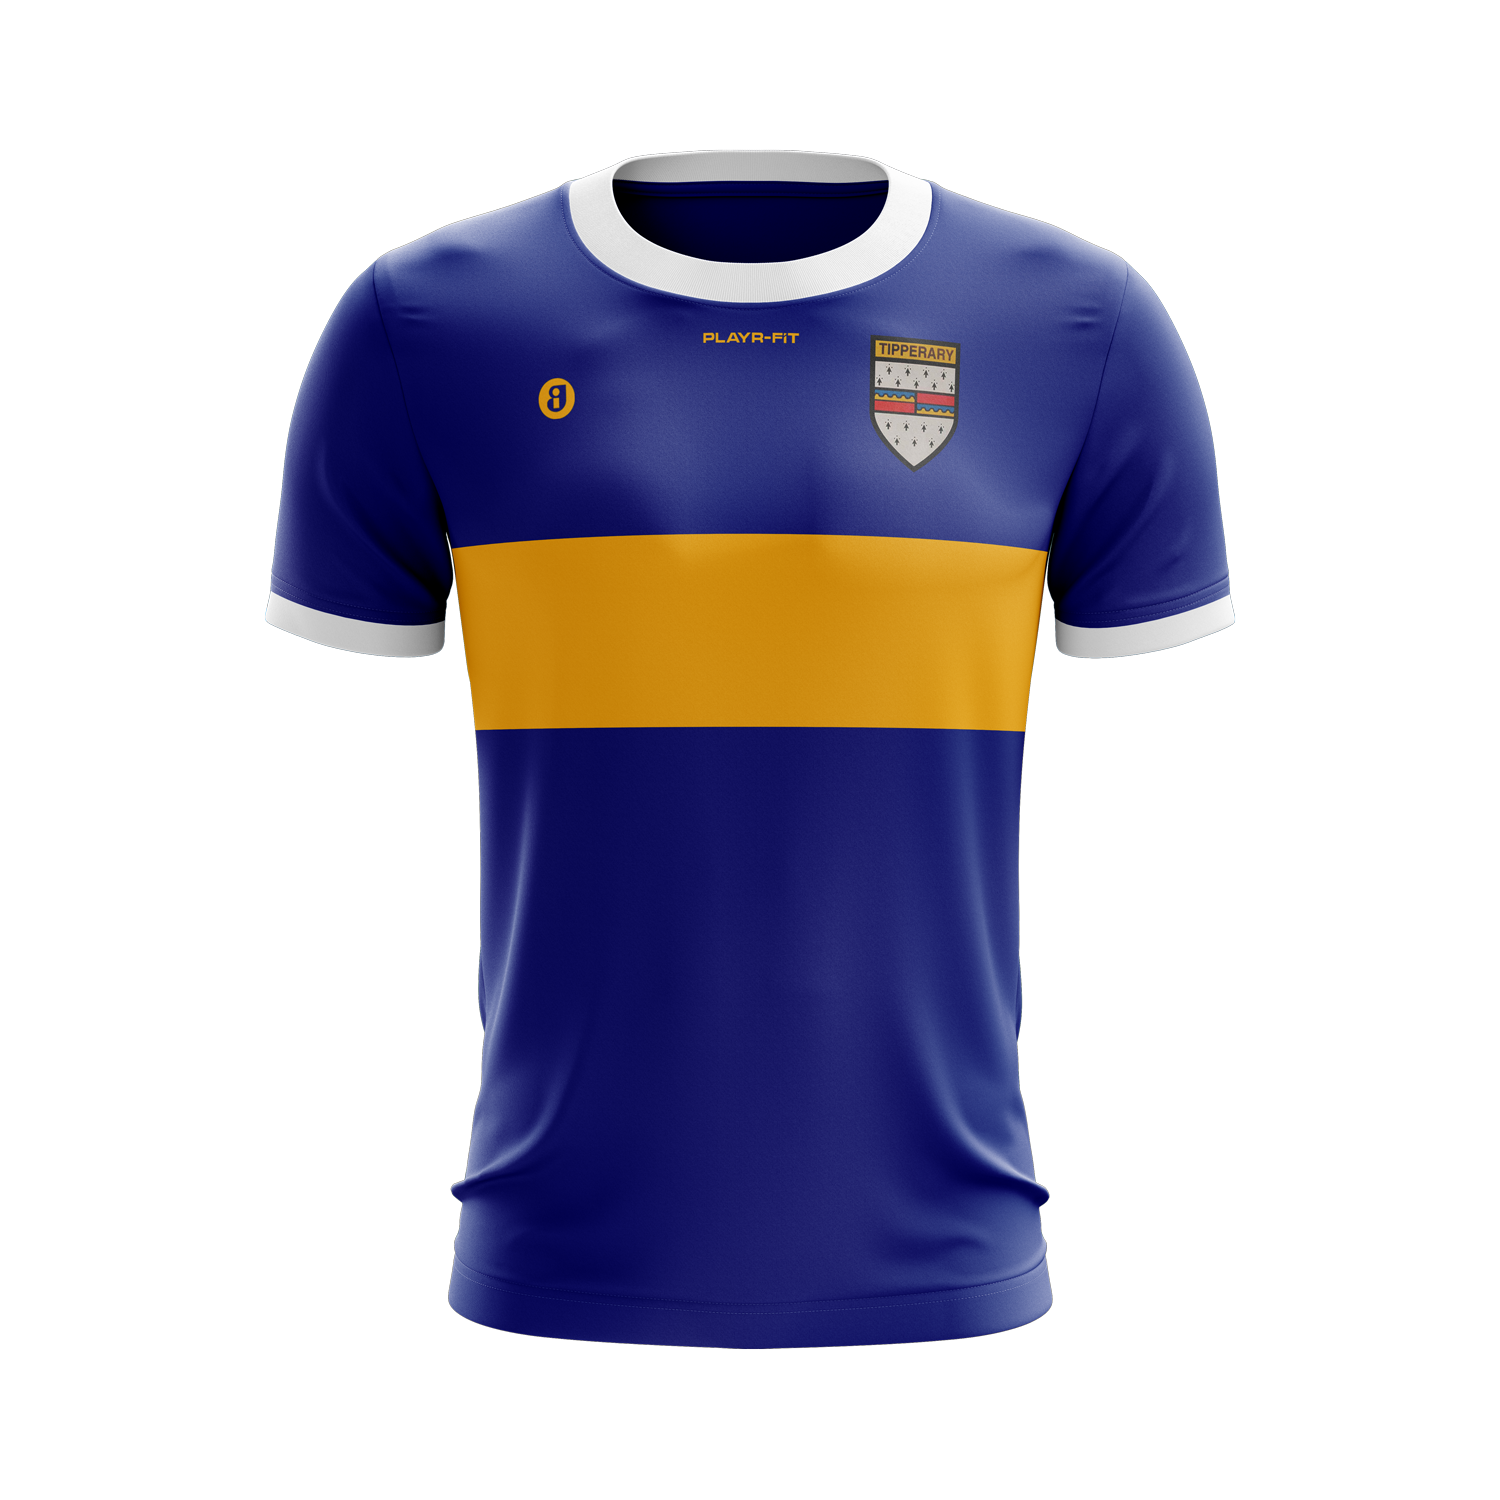 County Retro Tipperary Kid's Jersey - Home - PLAYR-FIT - Ireland & UK